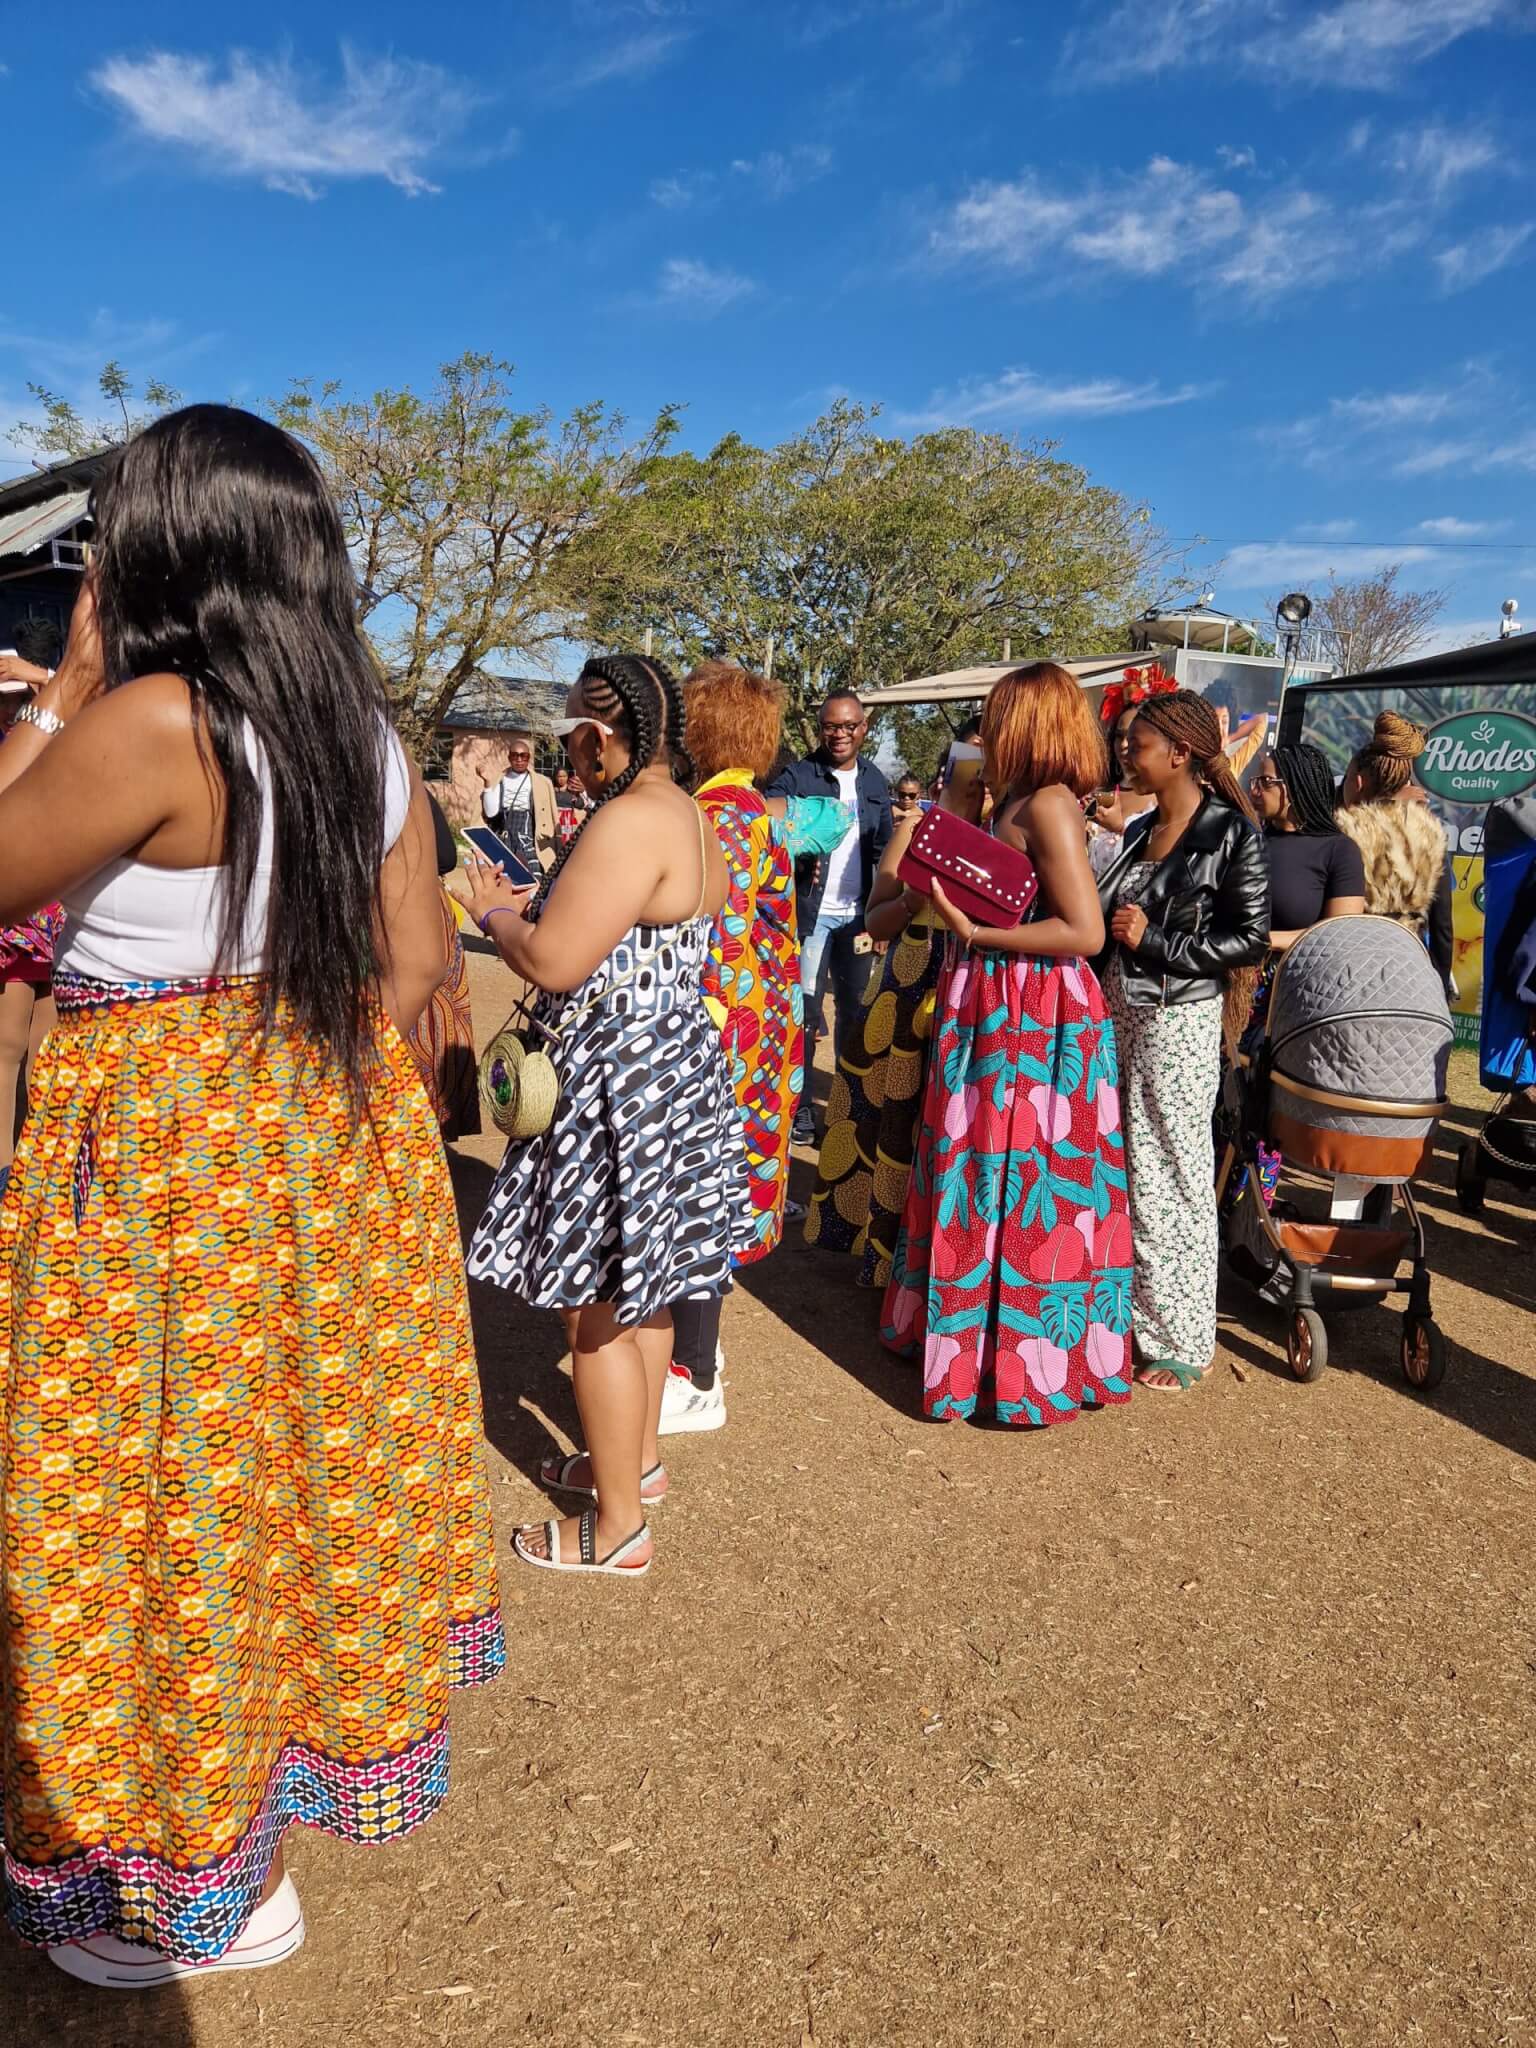 Fashion, food and resilience at Luju Festival